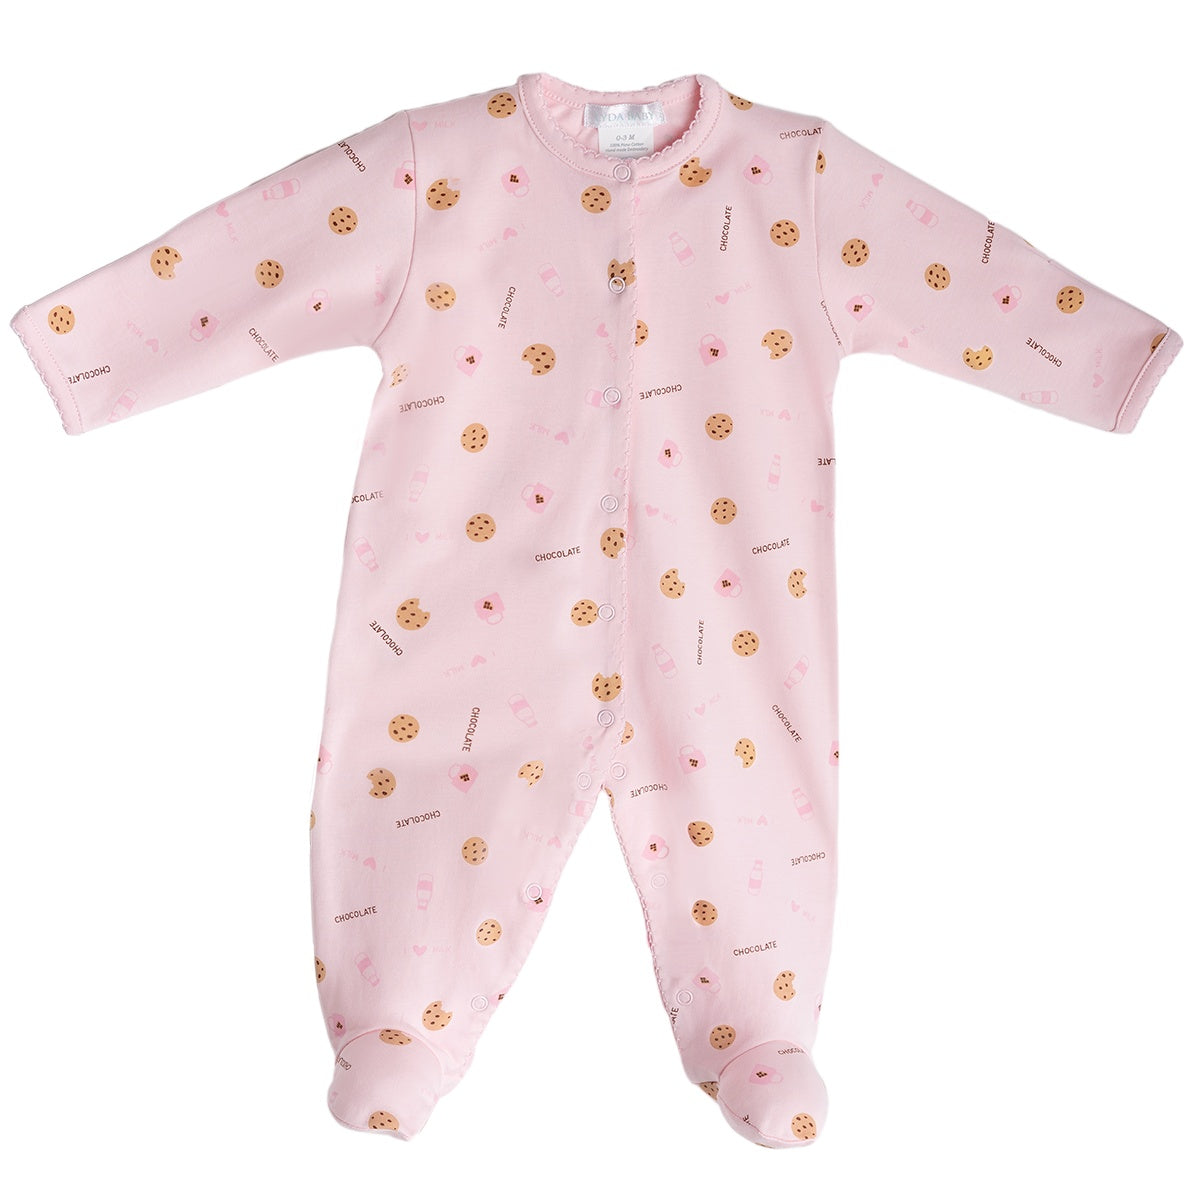 Pink pima cotton baby footie with cookies print